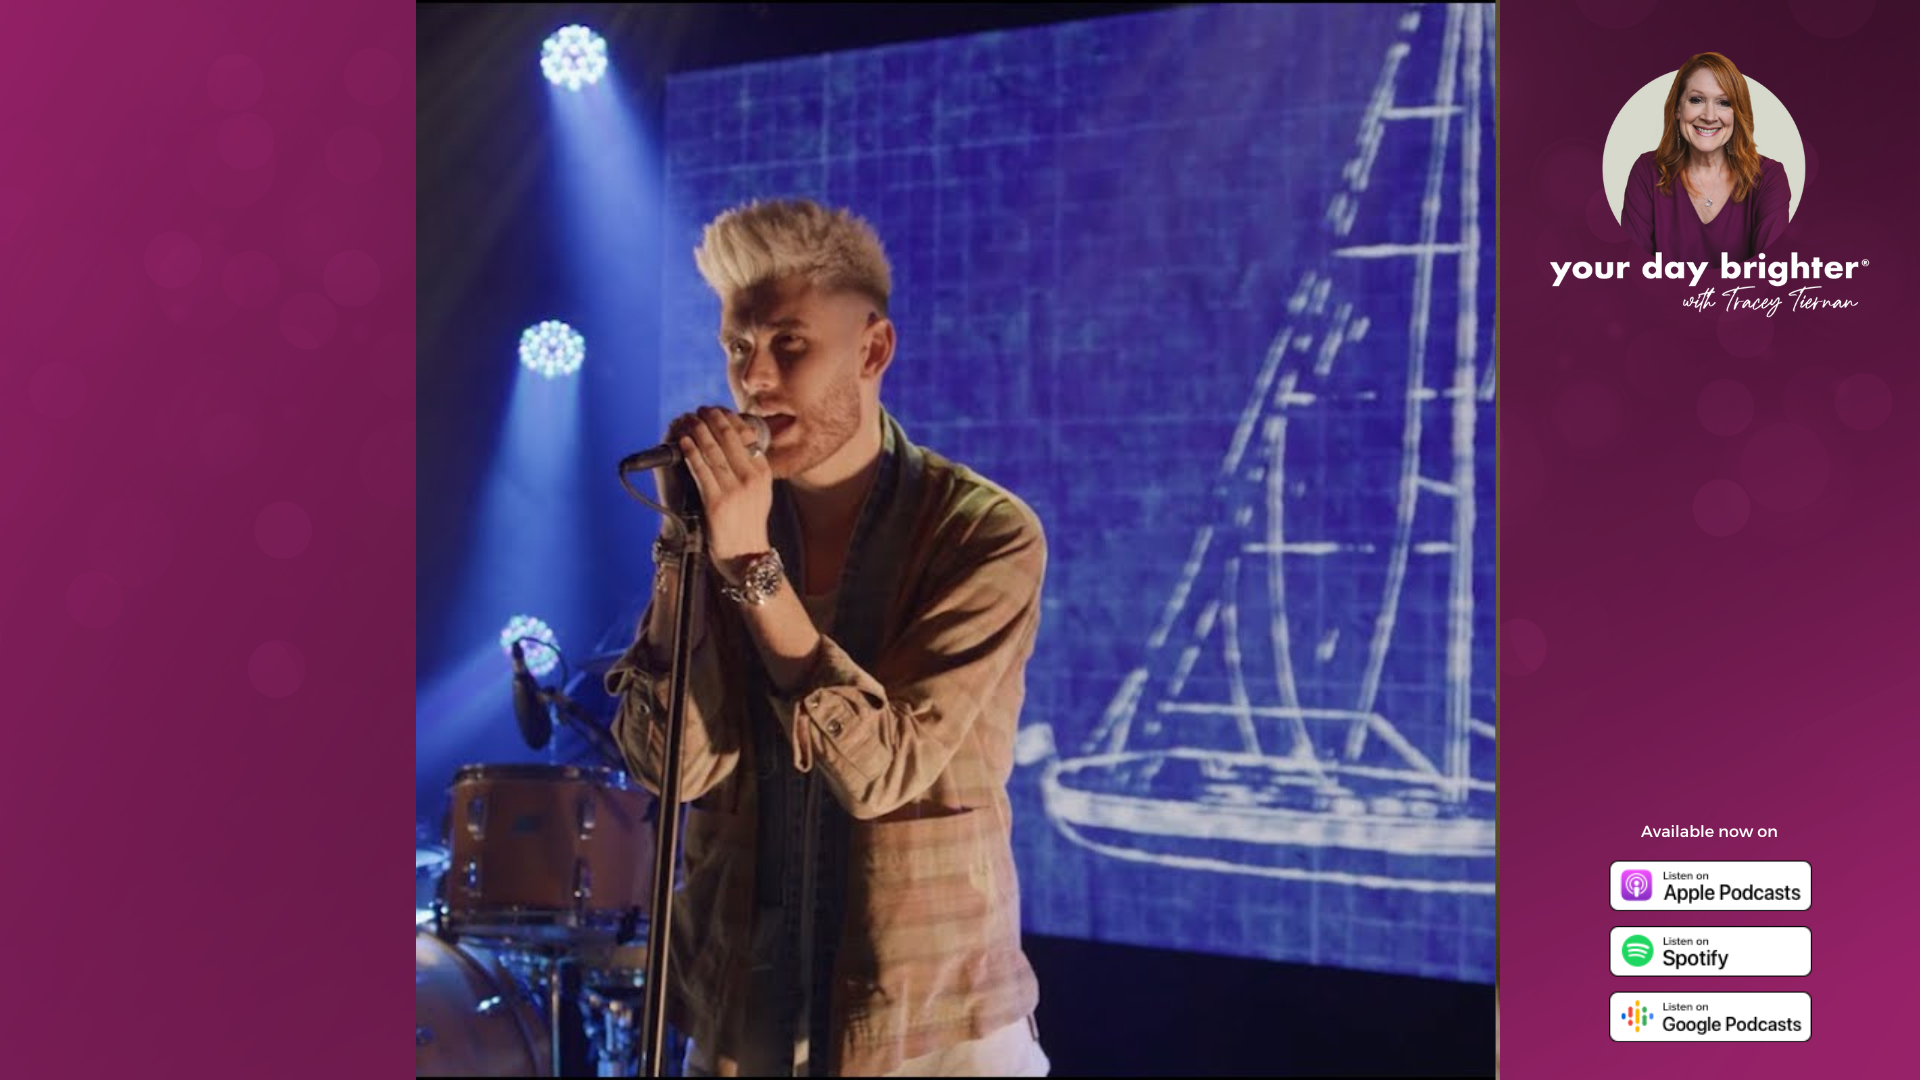 Colton Dixon singing into a microphone with a blueprint of a sailboat on a screen behind him